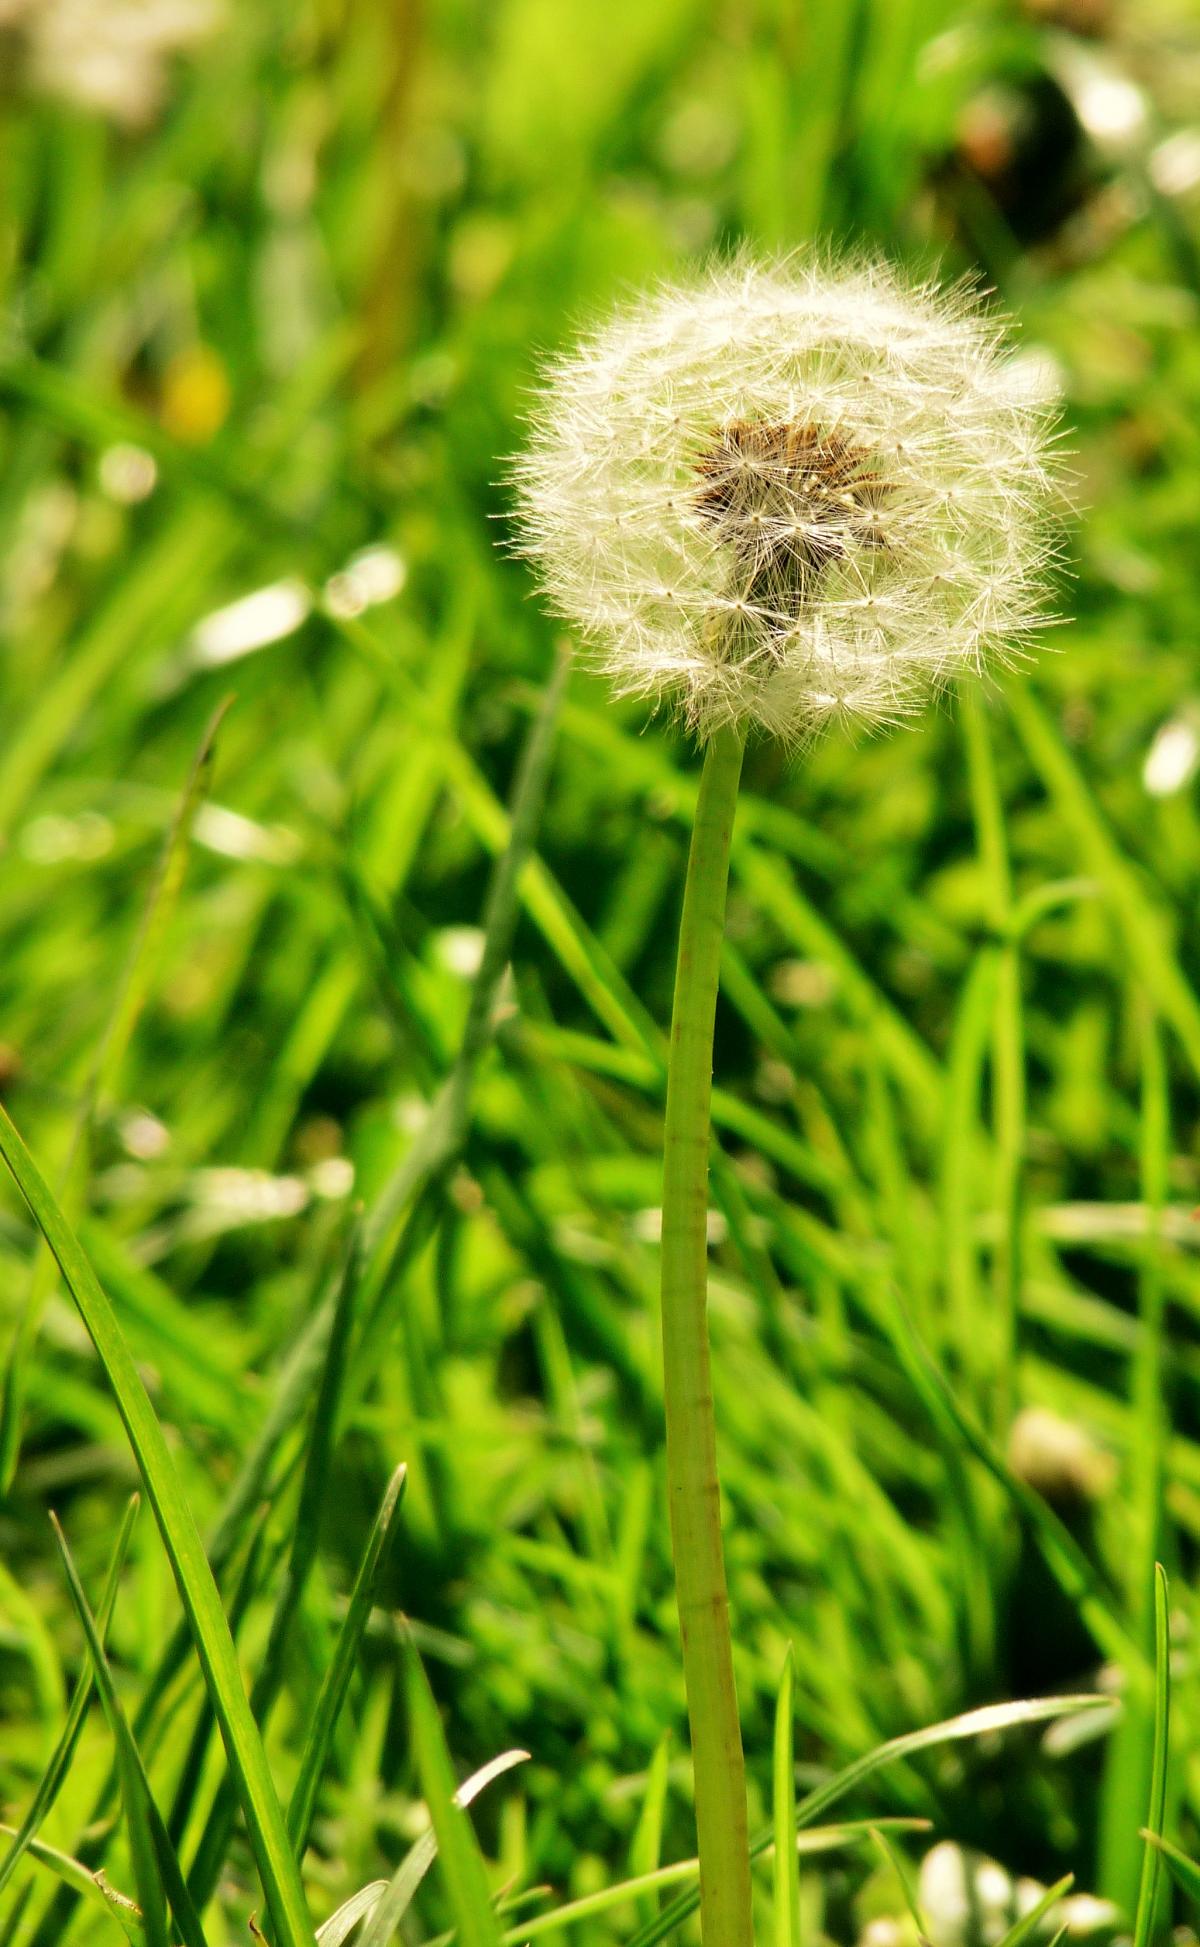 Make a wish on this dandelion clock. Sent in by Hayley Elizabeth Young